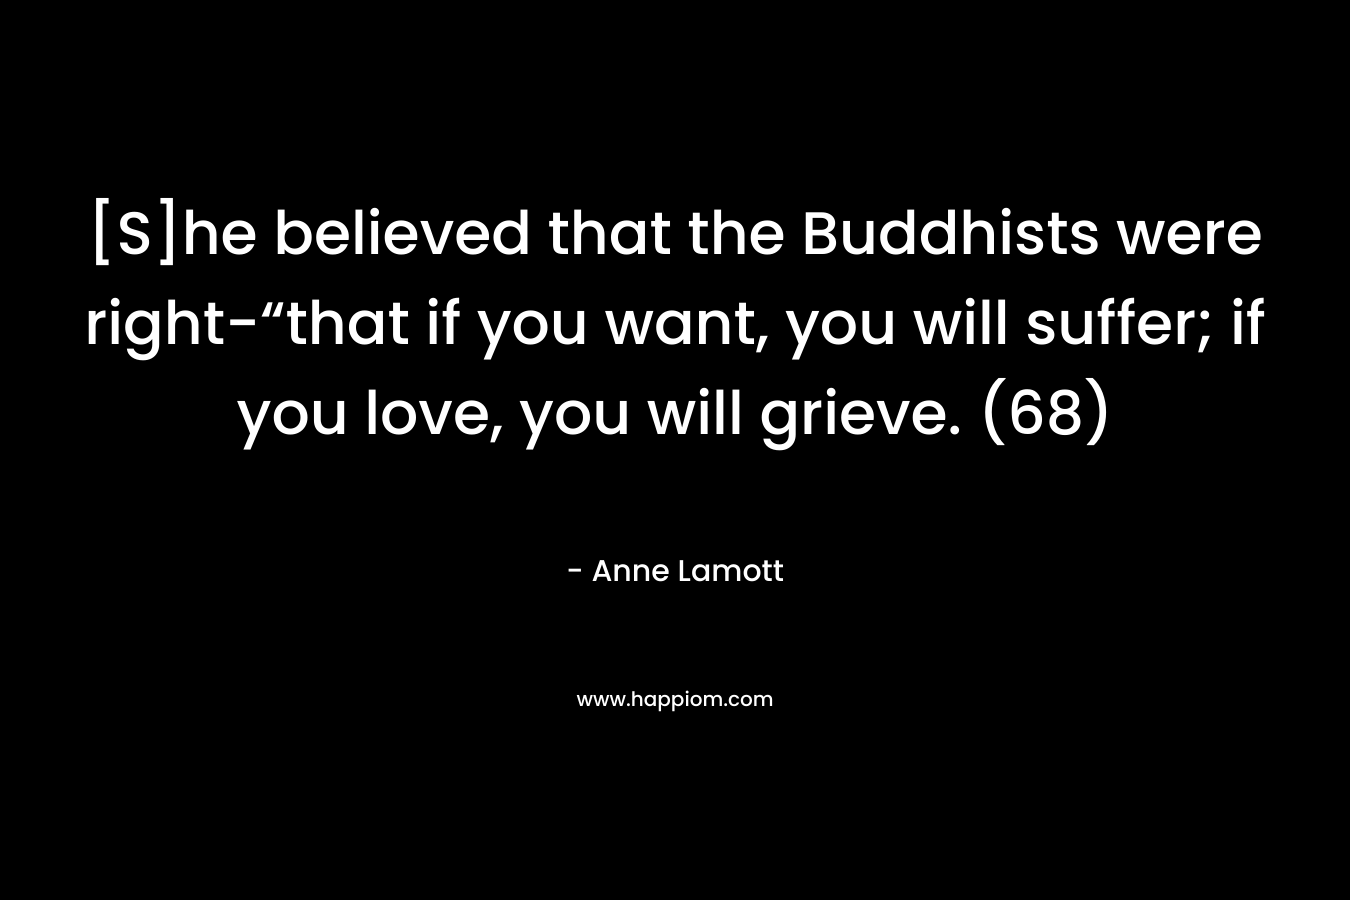 [S]he believed that the Buddhists were right-“that if you want, you will suffer; if you love, you will grieve. (68)